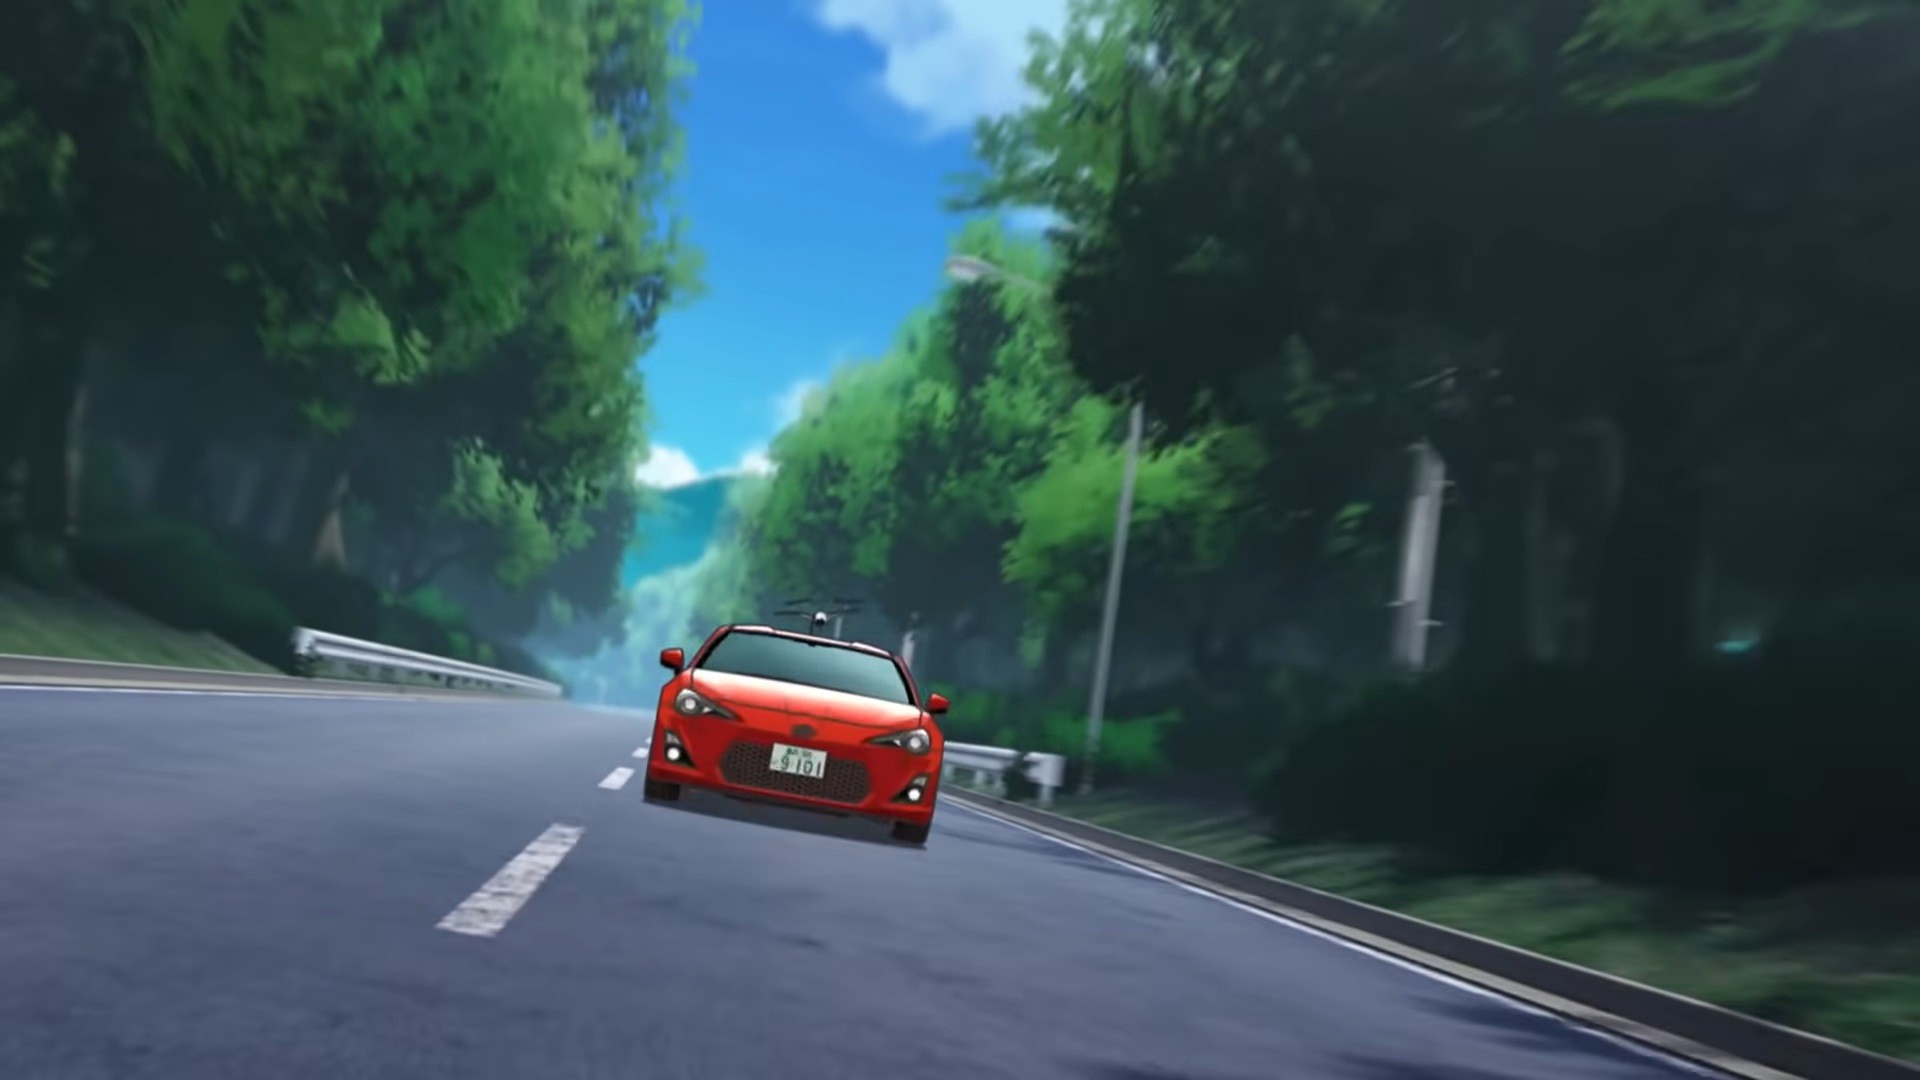 Initial D Sequel Manga MF Ghost Gets Anime Adaptation in 2023